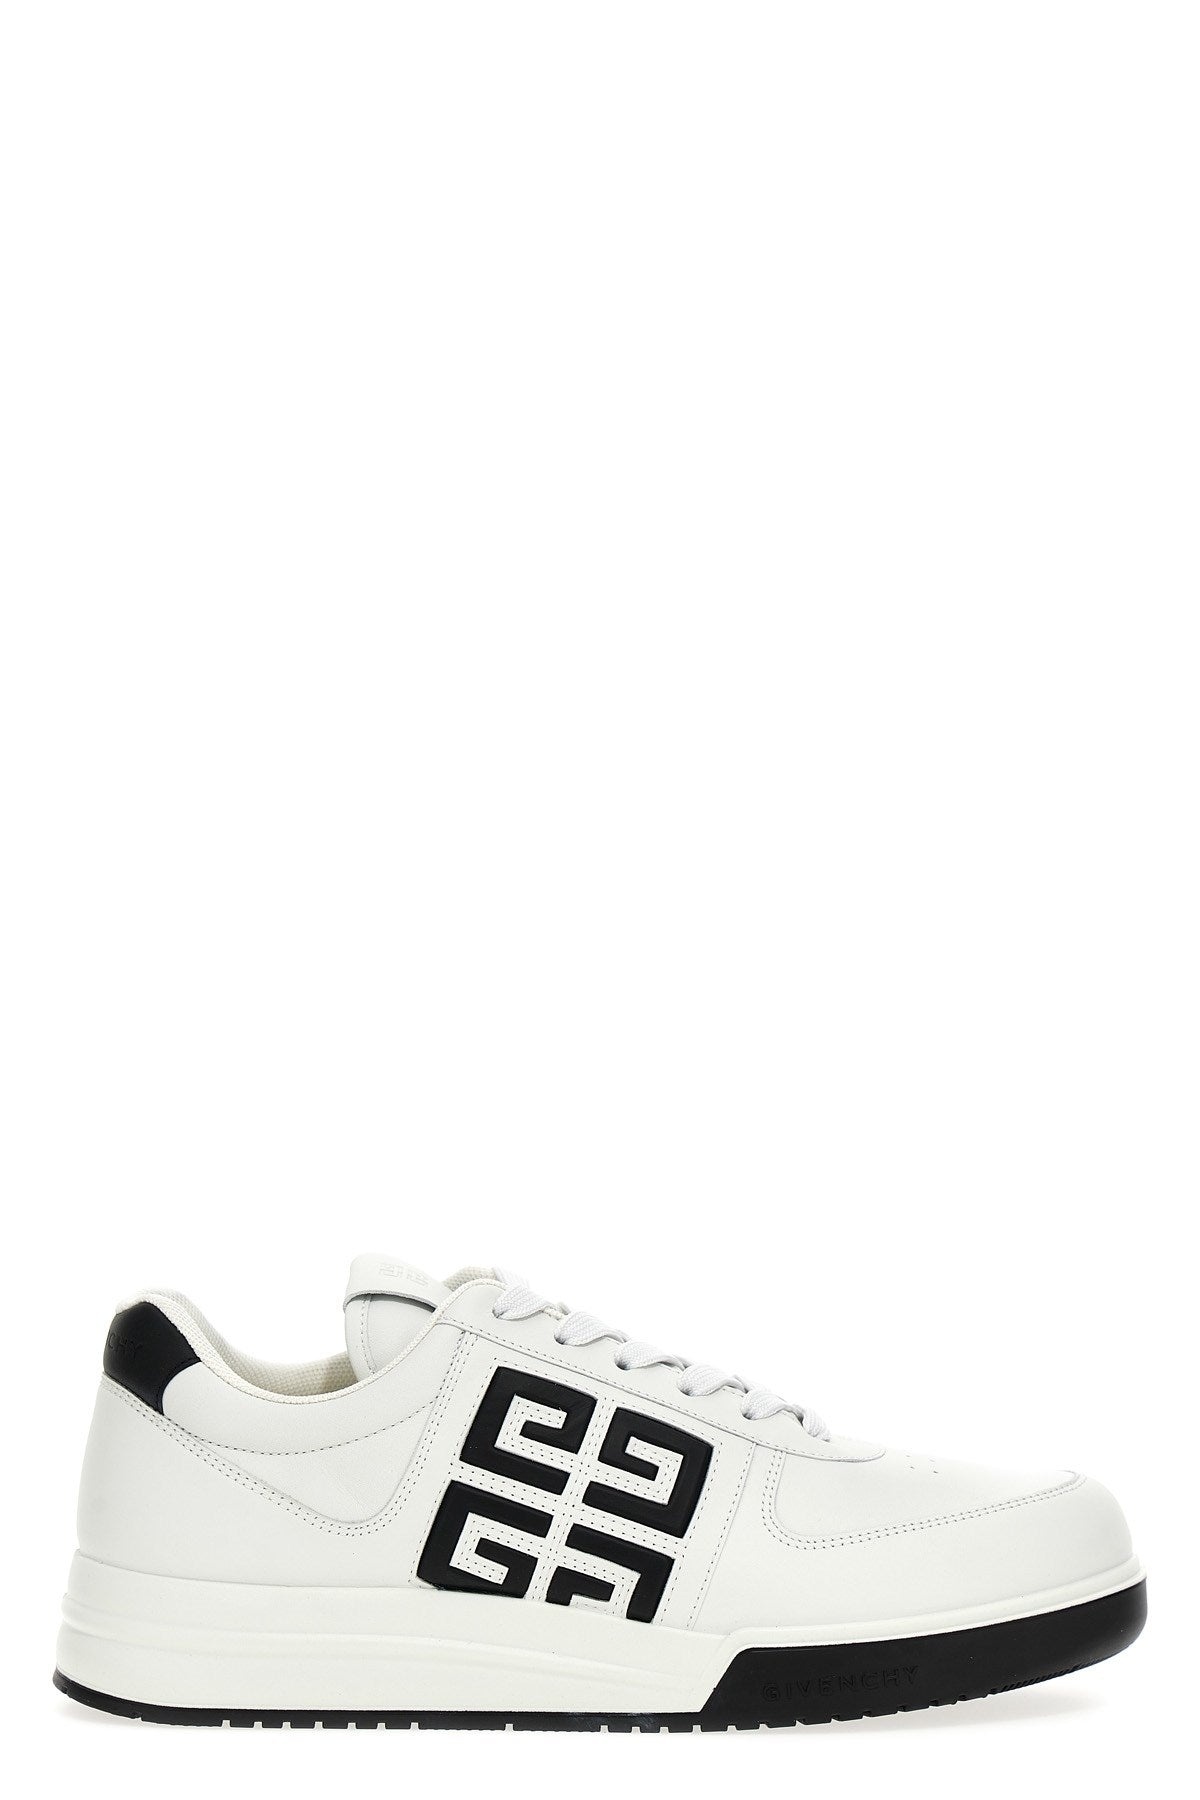 Givenchy Men 'G4' Sneakers - 1